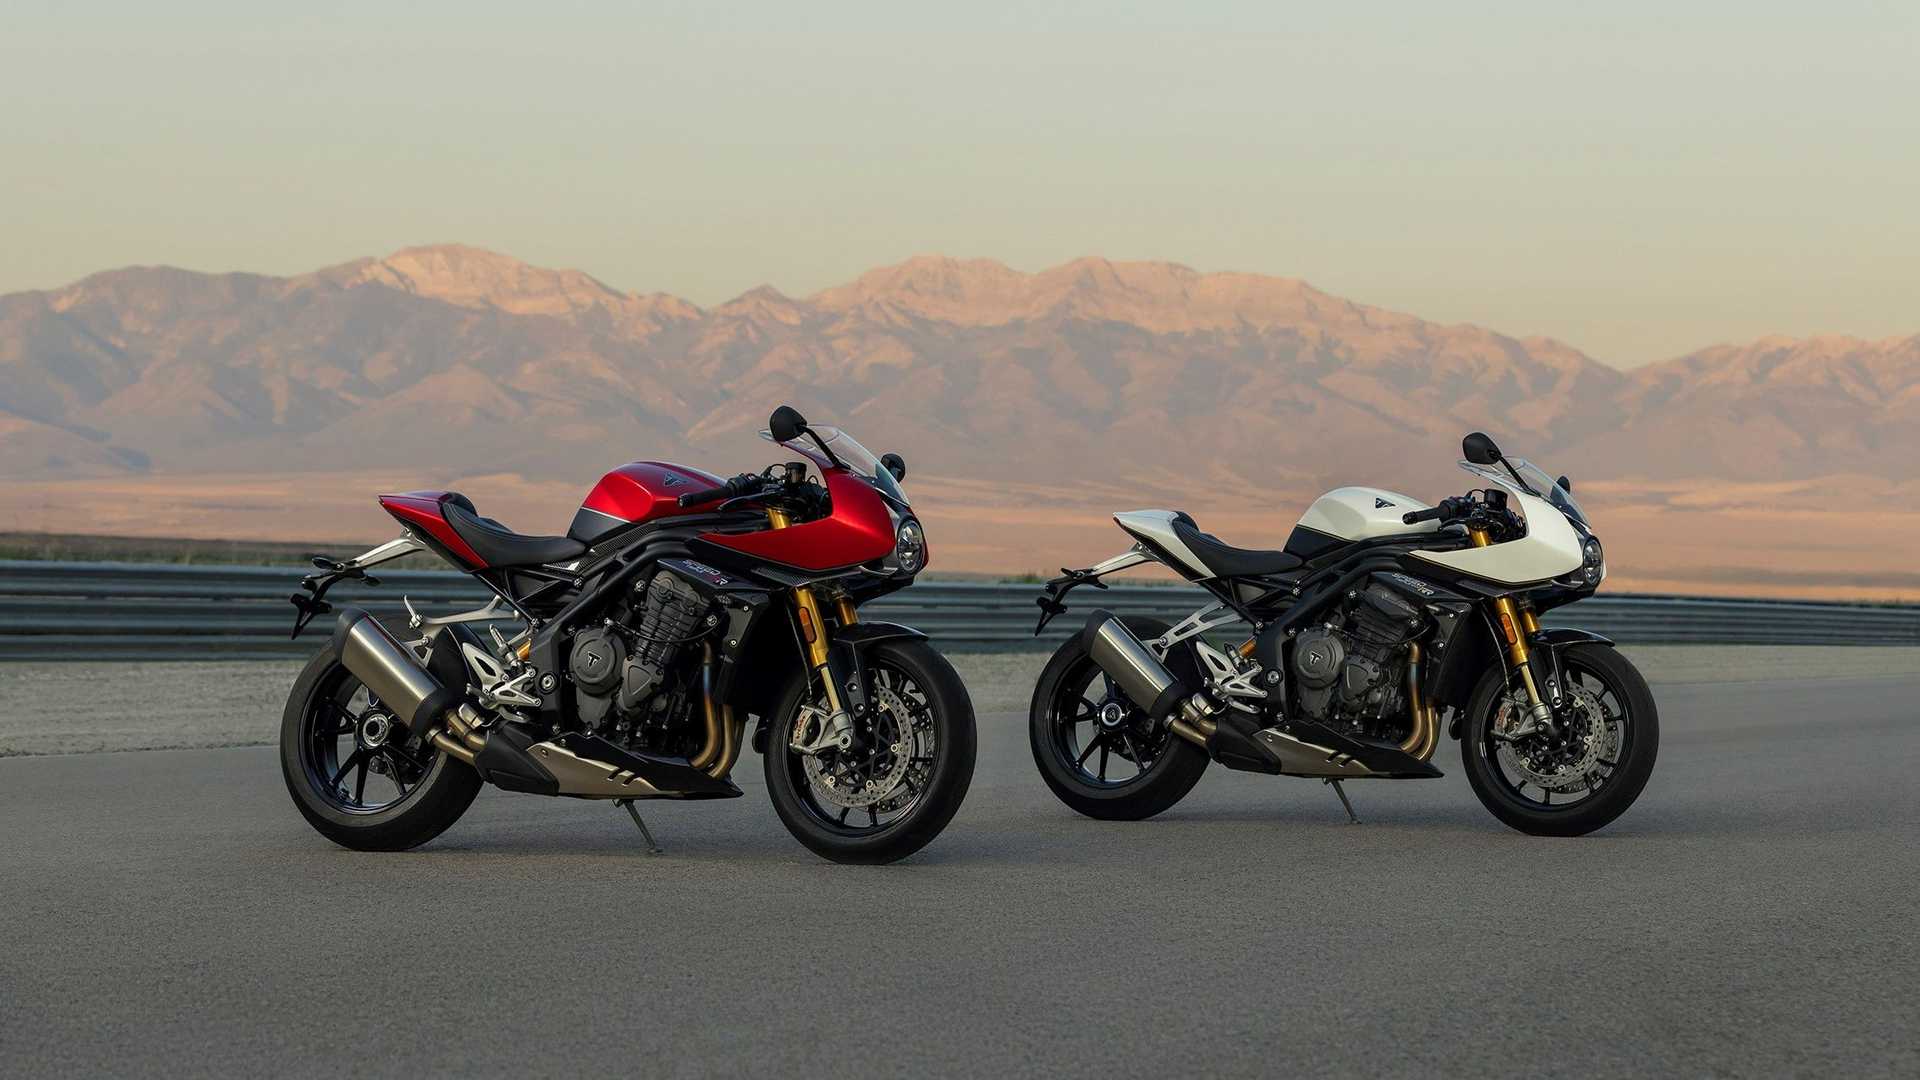 Two color schemes for the 2022 Triumph Speed Triple 1200 RR